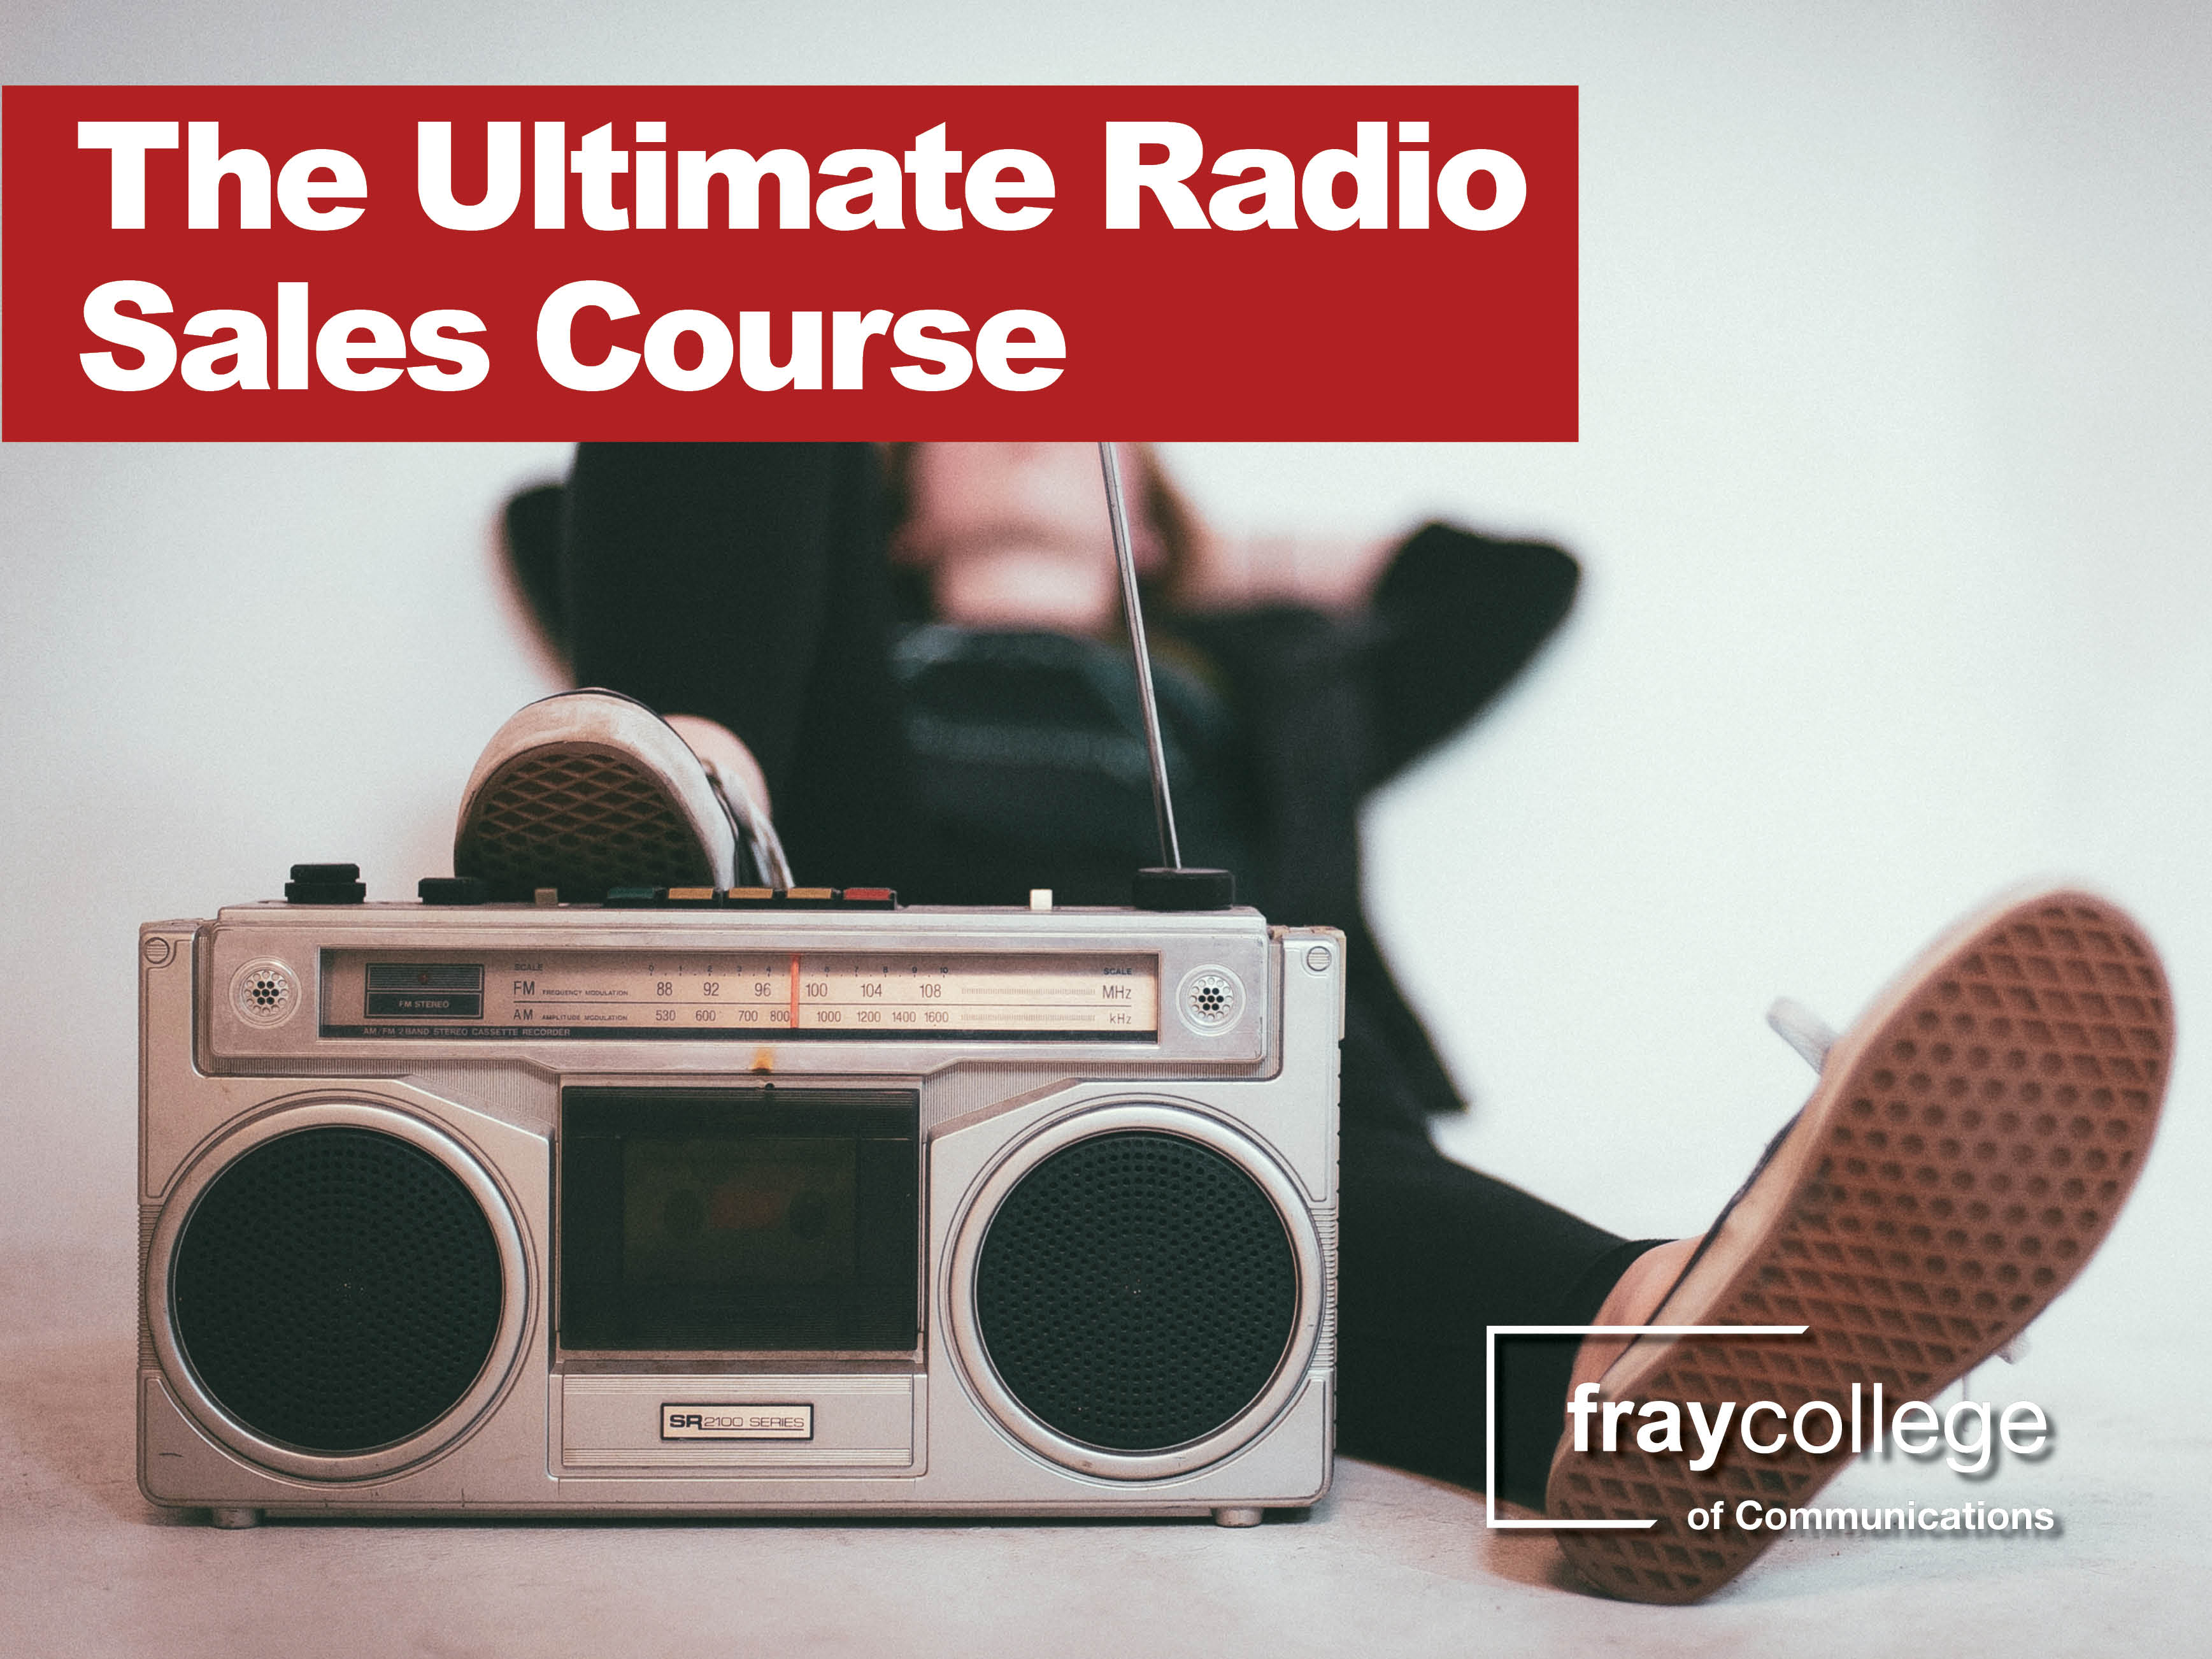 The Ultimate Radio Sales Course